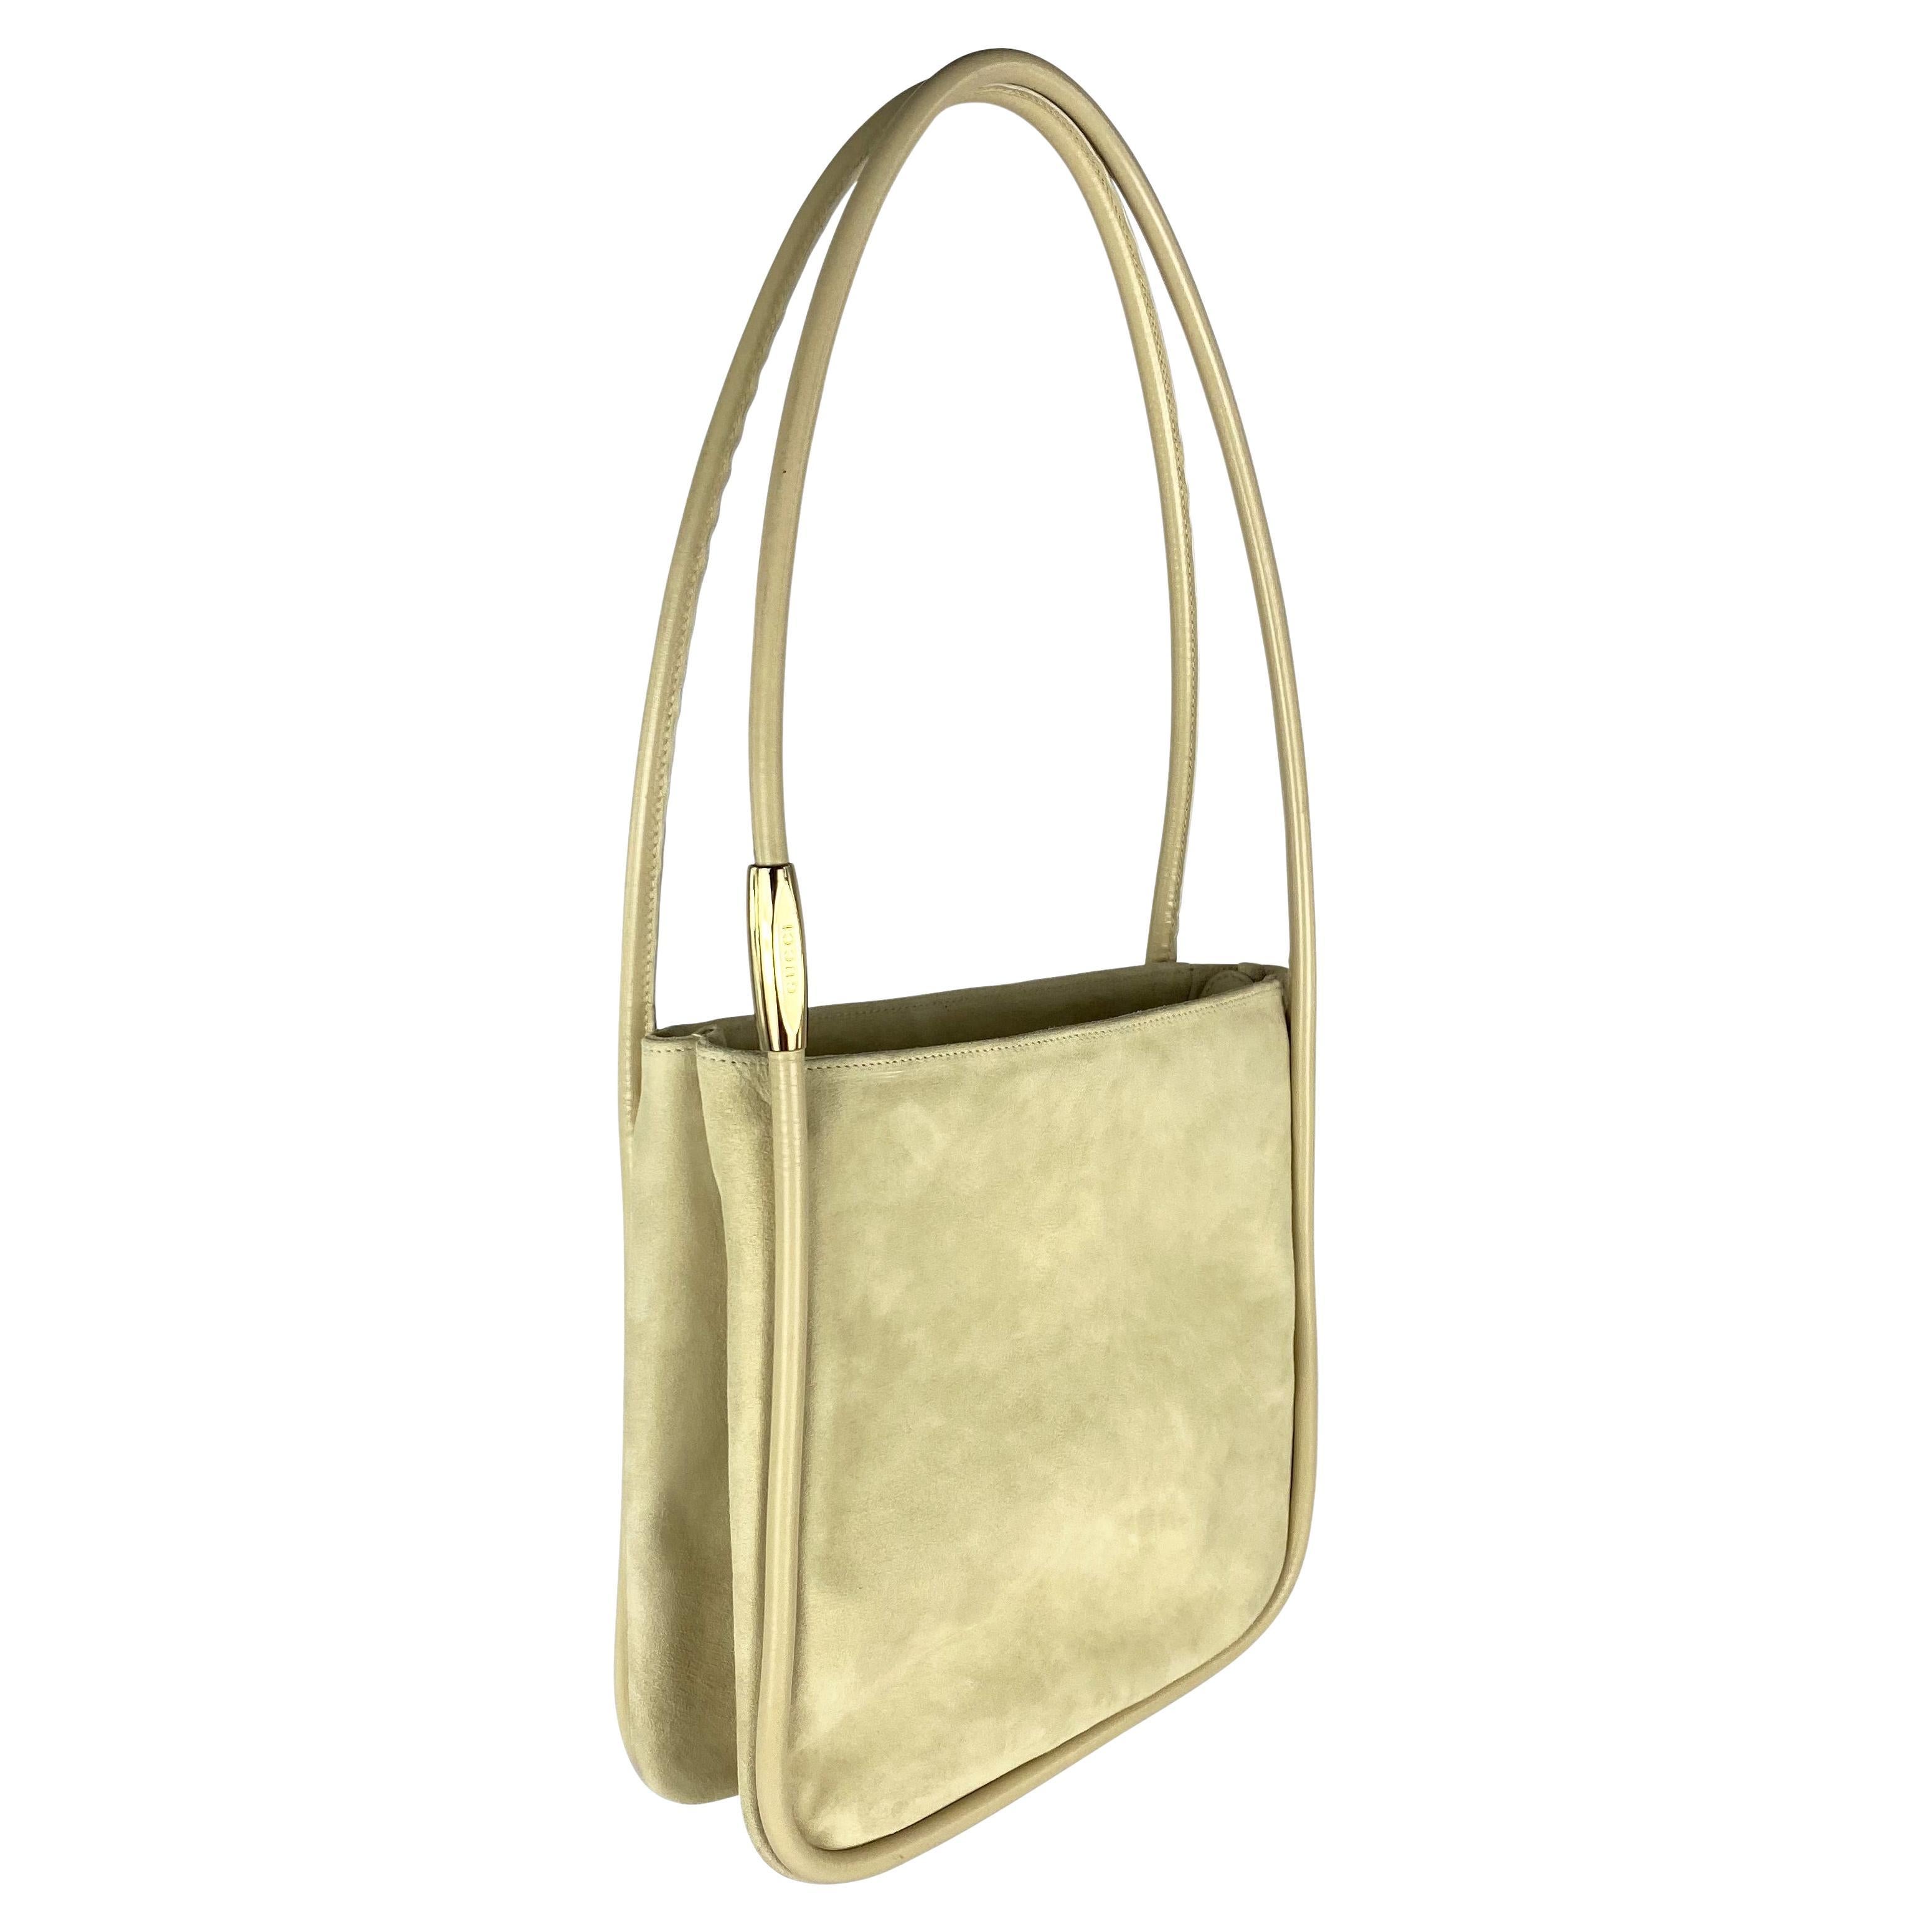 Presenting a fabulous light beige suede Gucci bag designed by Tom Ford. From the 1996 collection, this suede bag features leather piping and handles, a gold-tone accent on the strap, and is made complete with the original tags. Add this